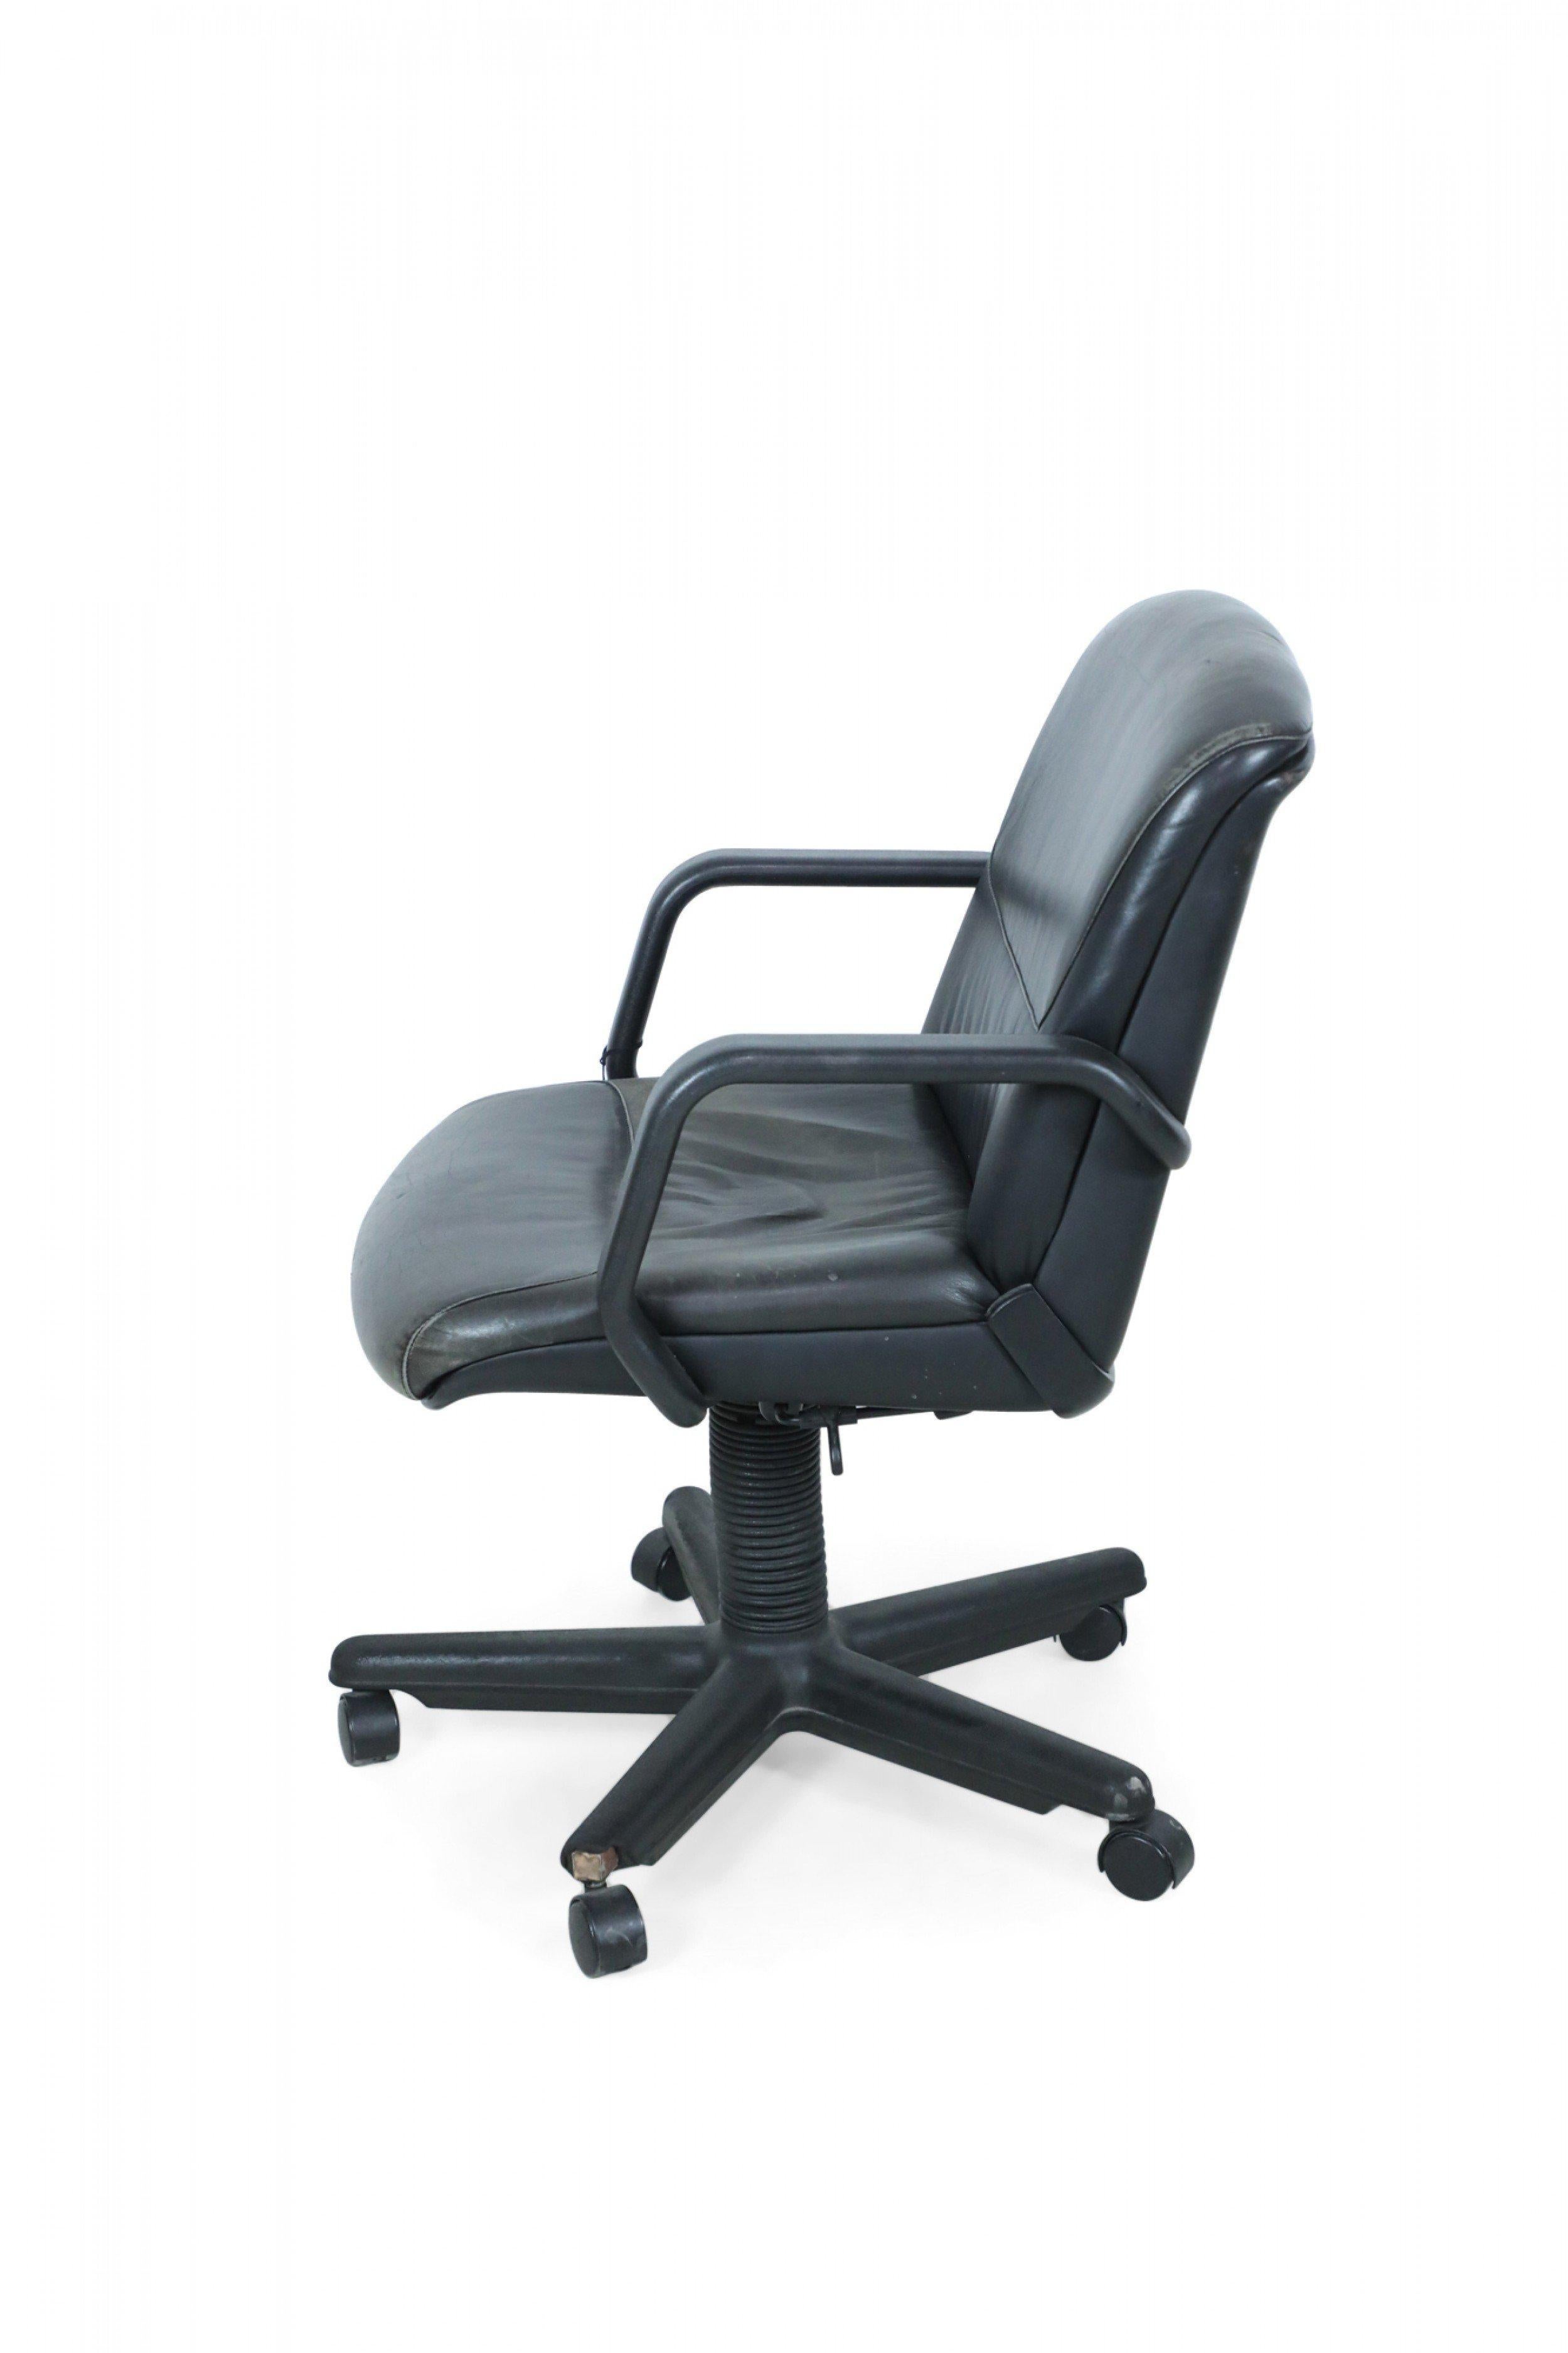 contemporary leather office chair